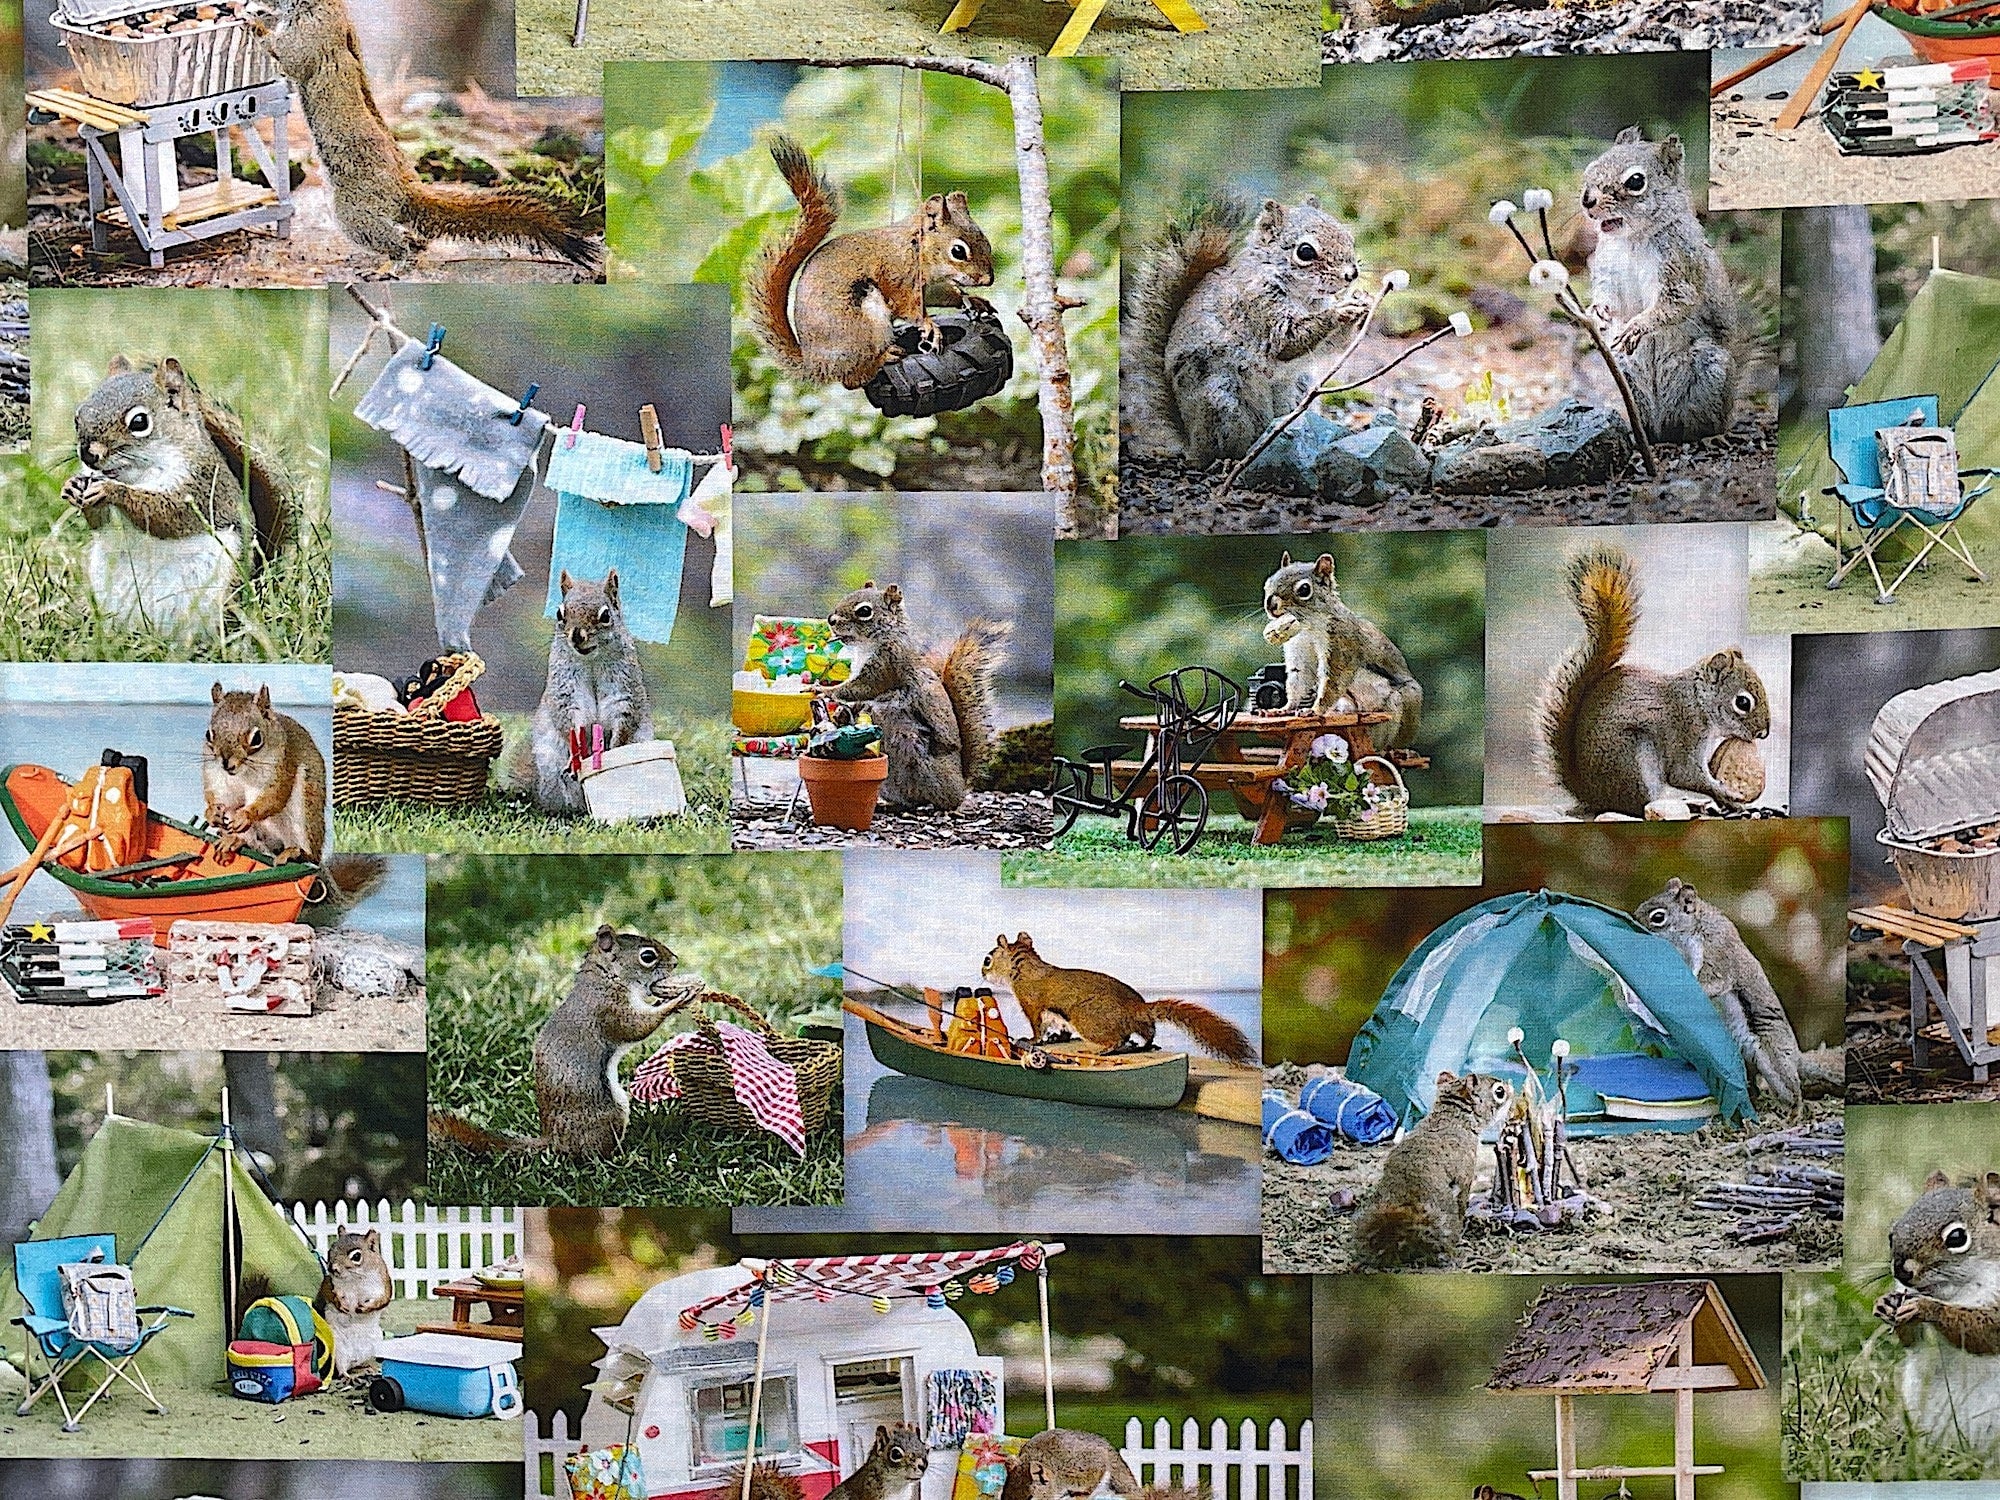 This fabric is part of the Secret Life of Squirrels collection by Nancy Rose. This cotton fabric is covered with squirrels enjoying the outdoors. Some of the squirrels are eating peanuts, playing by tents or by boats. Other squirrels are roasting marshmallows by the campfire.